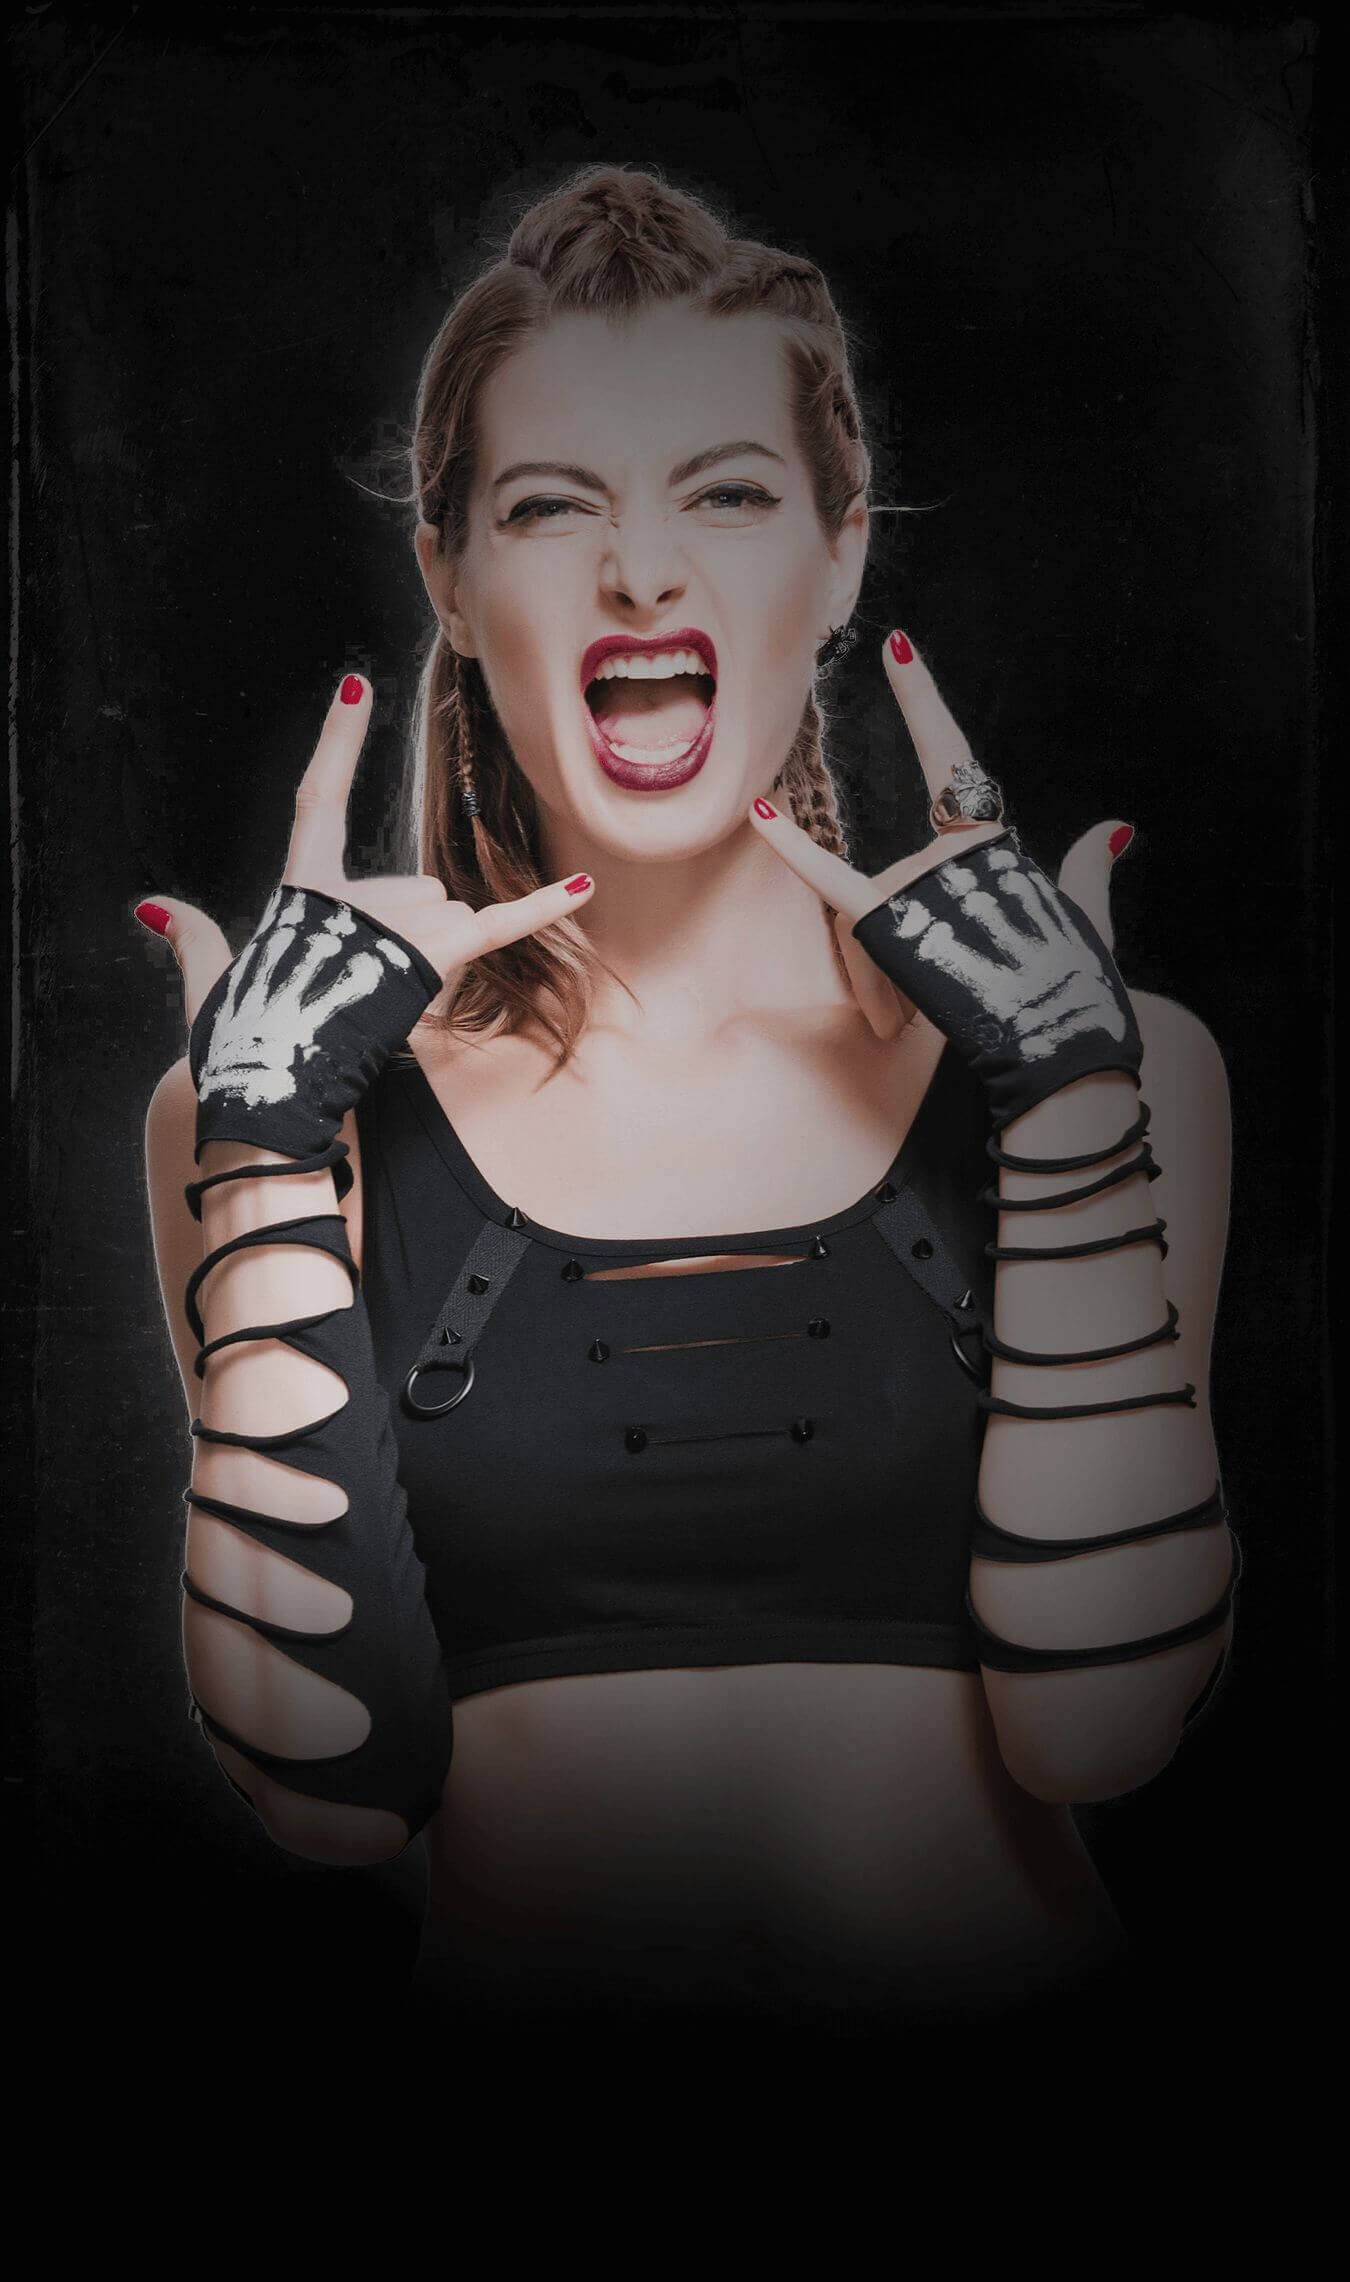 Rock-inspired collection: woman in black cut-out top and fingerless gloves making rock n' roll hand sign with a bold, rebellious expression.